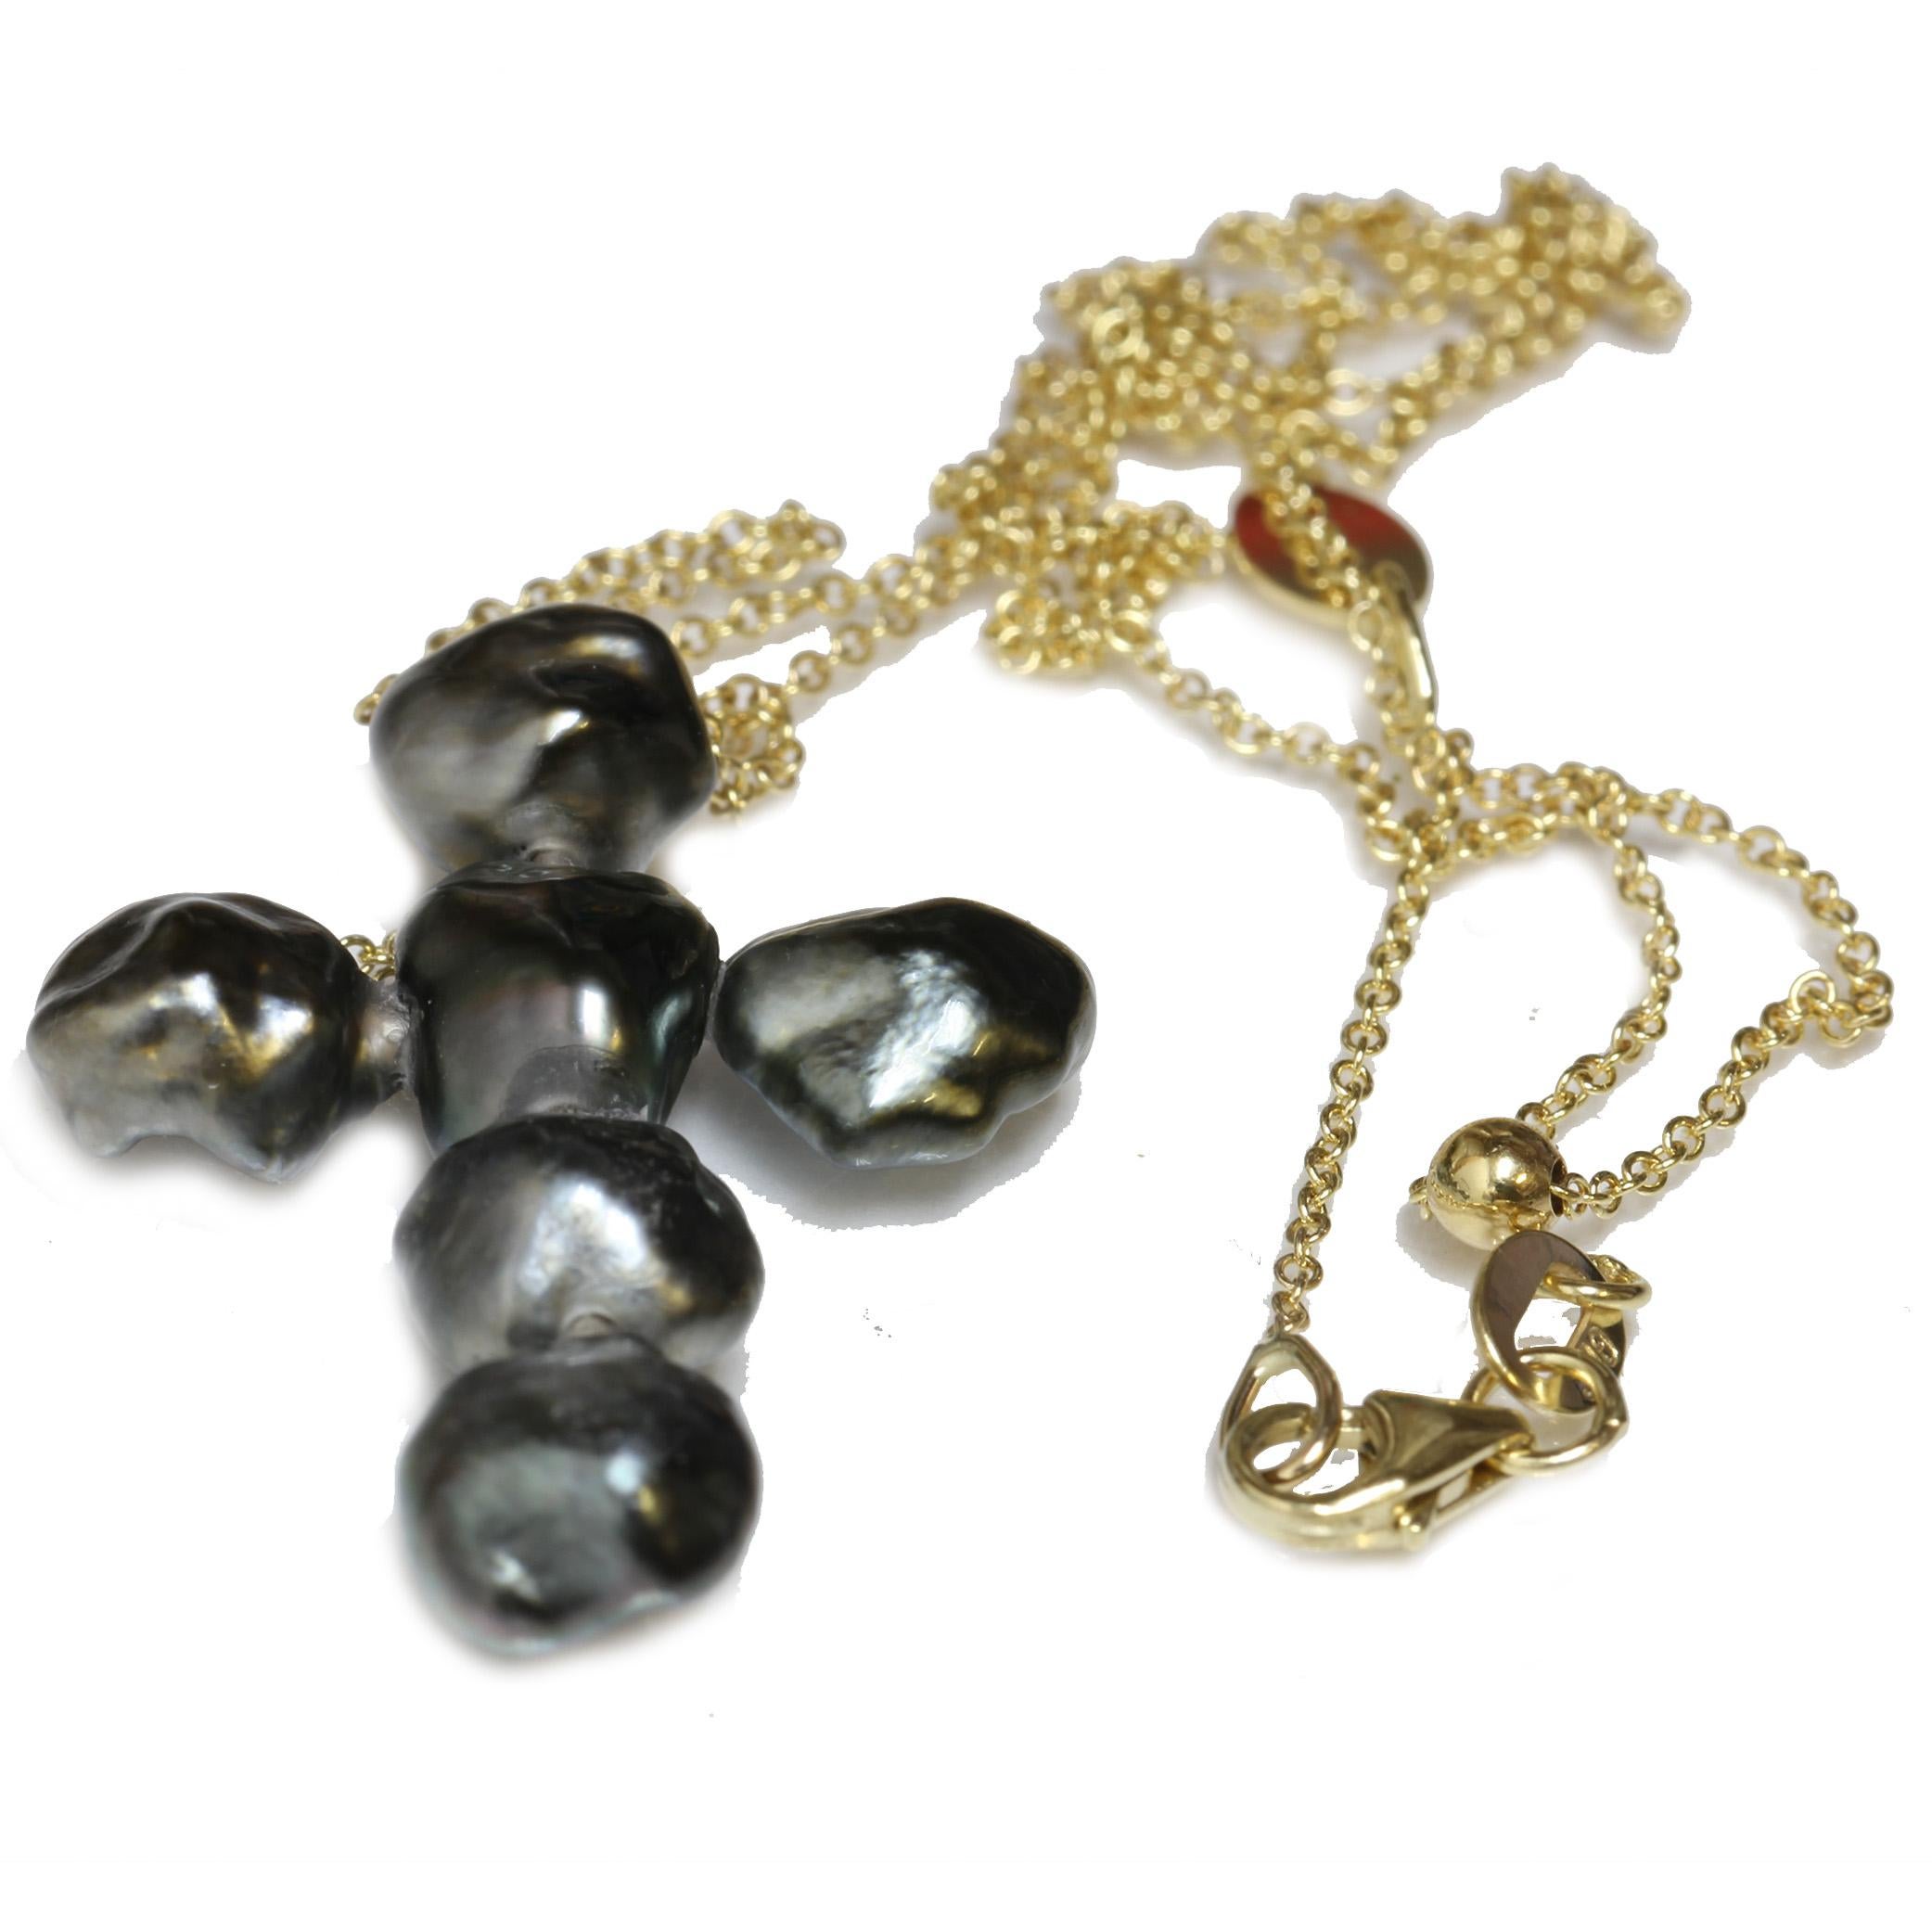 7.0 - 8.0mm  Tahitian keshi pearl diamond cross necklace set in 14kt yellow gold rolo Italian adjustable chain . The pearls is stunning black in color with unique baroque shape. The chain can be easily adjusted by sliding the ball from 18